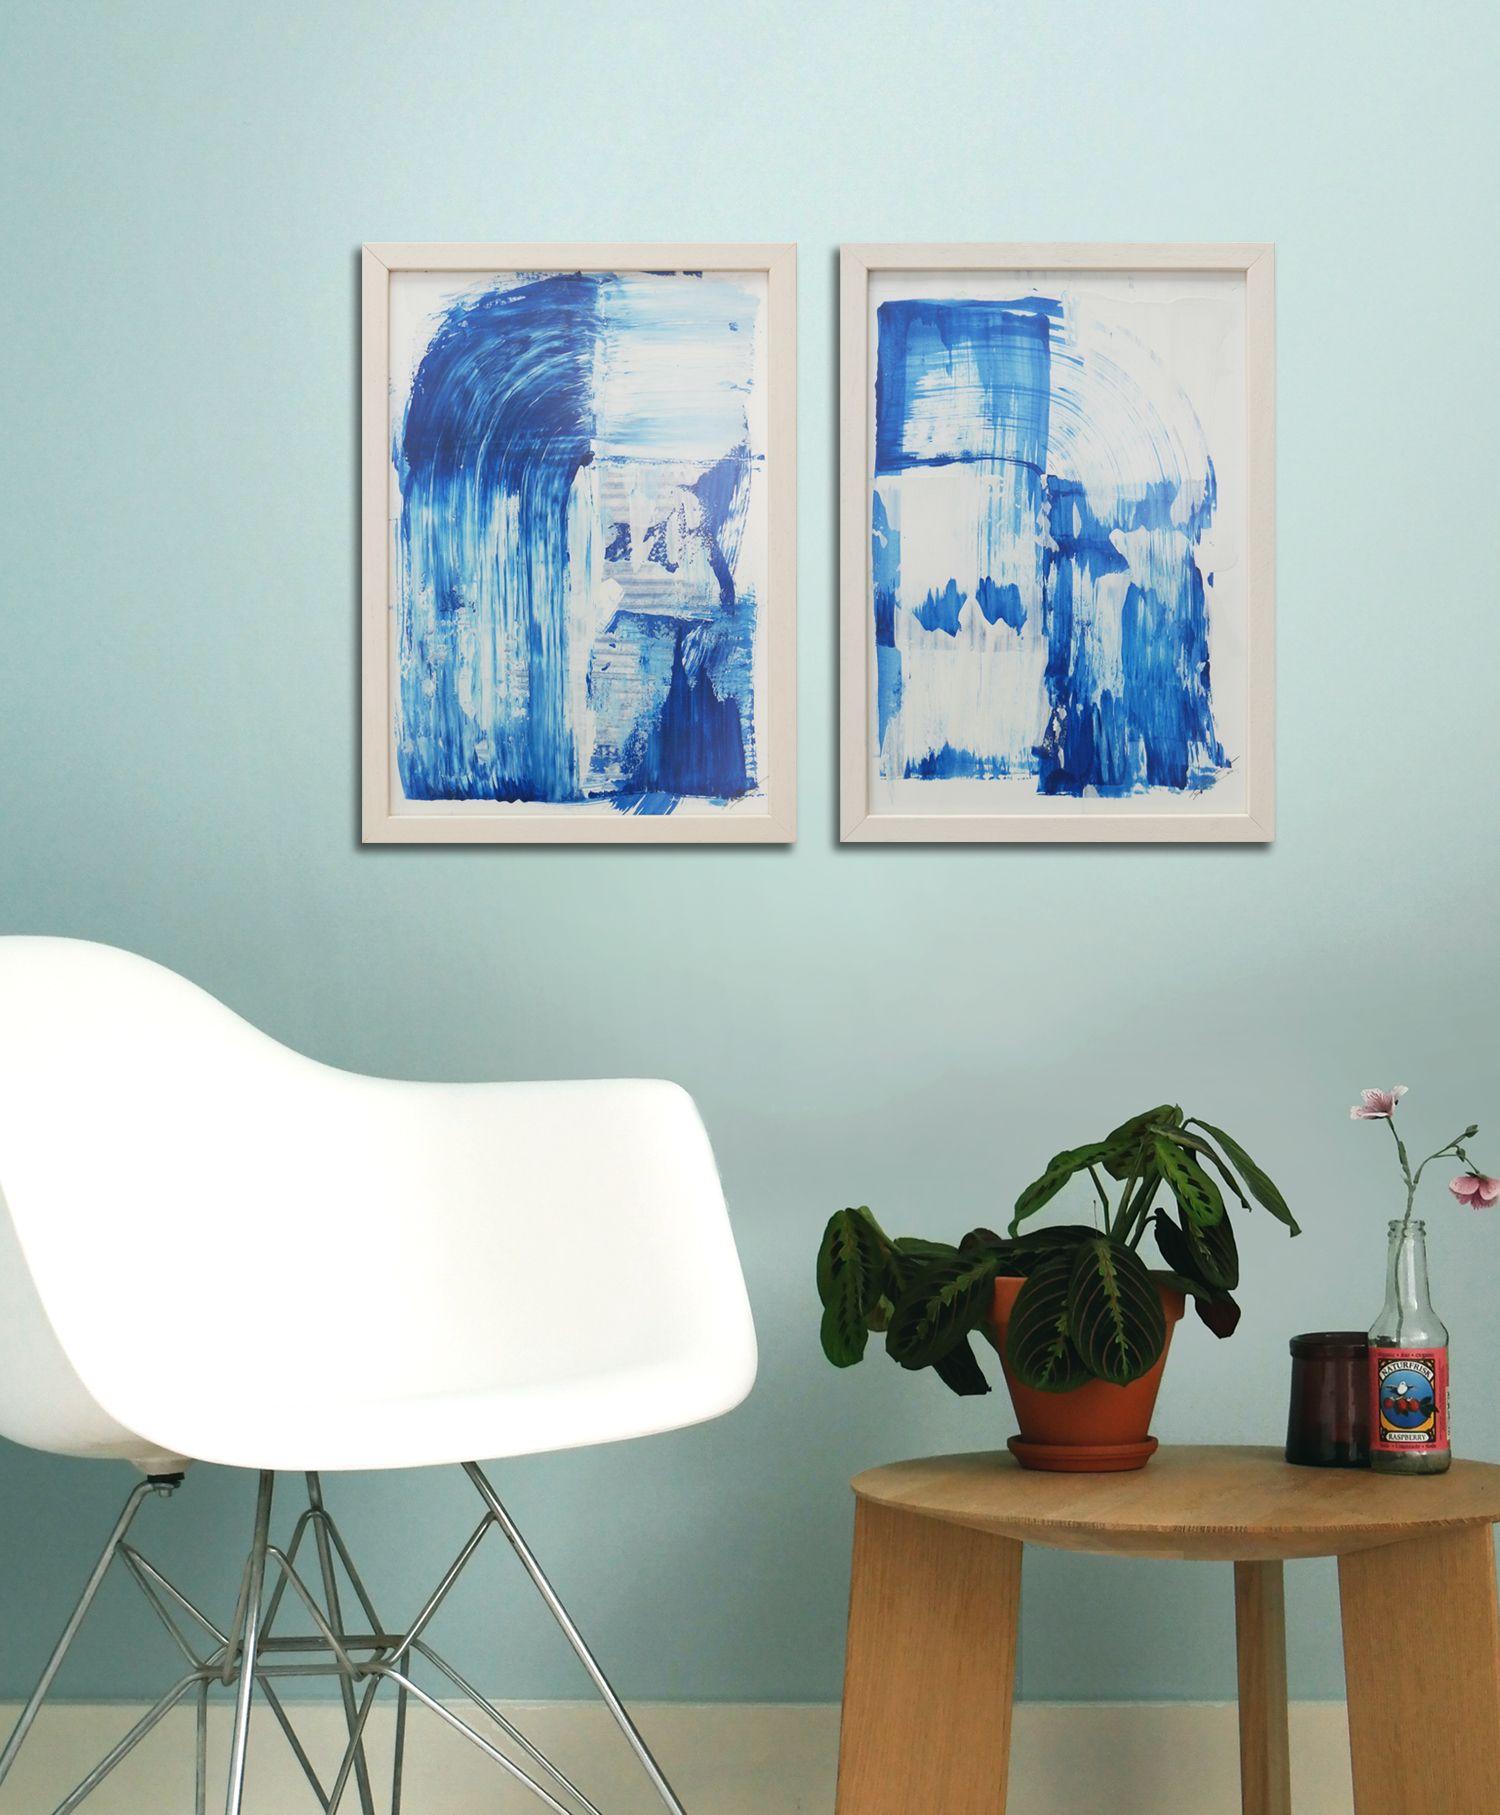 Dreamwave Blue - Diptych - Incl Frame, Painting, Acrylic on Paper - Gray Abstract Painting by Ronald Hunter